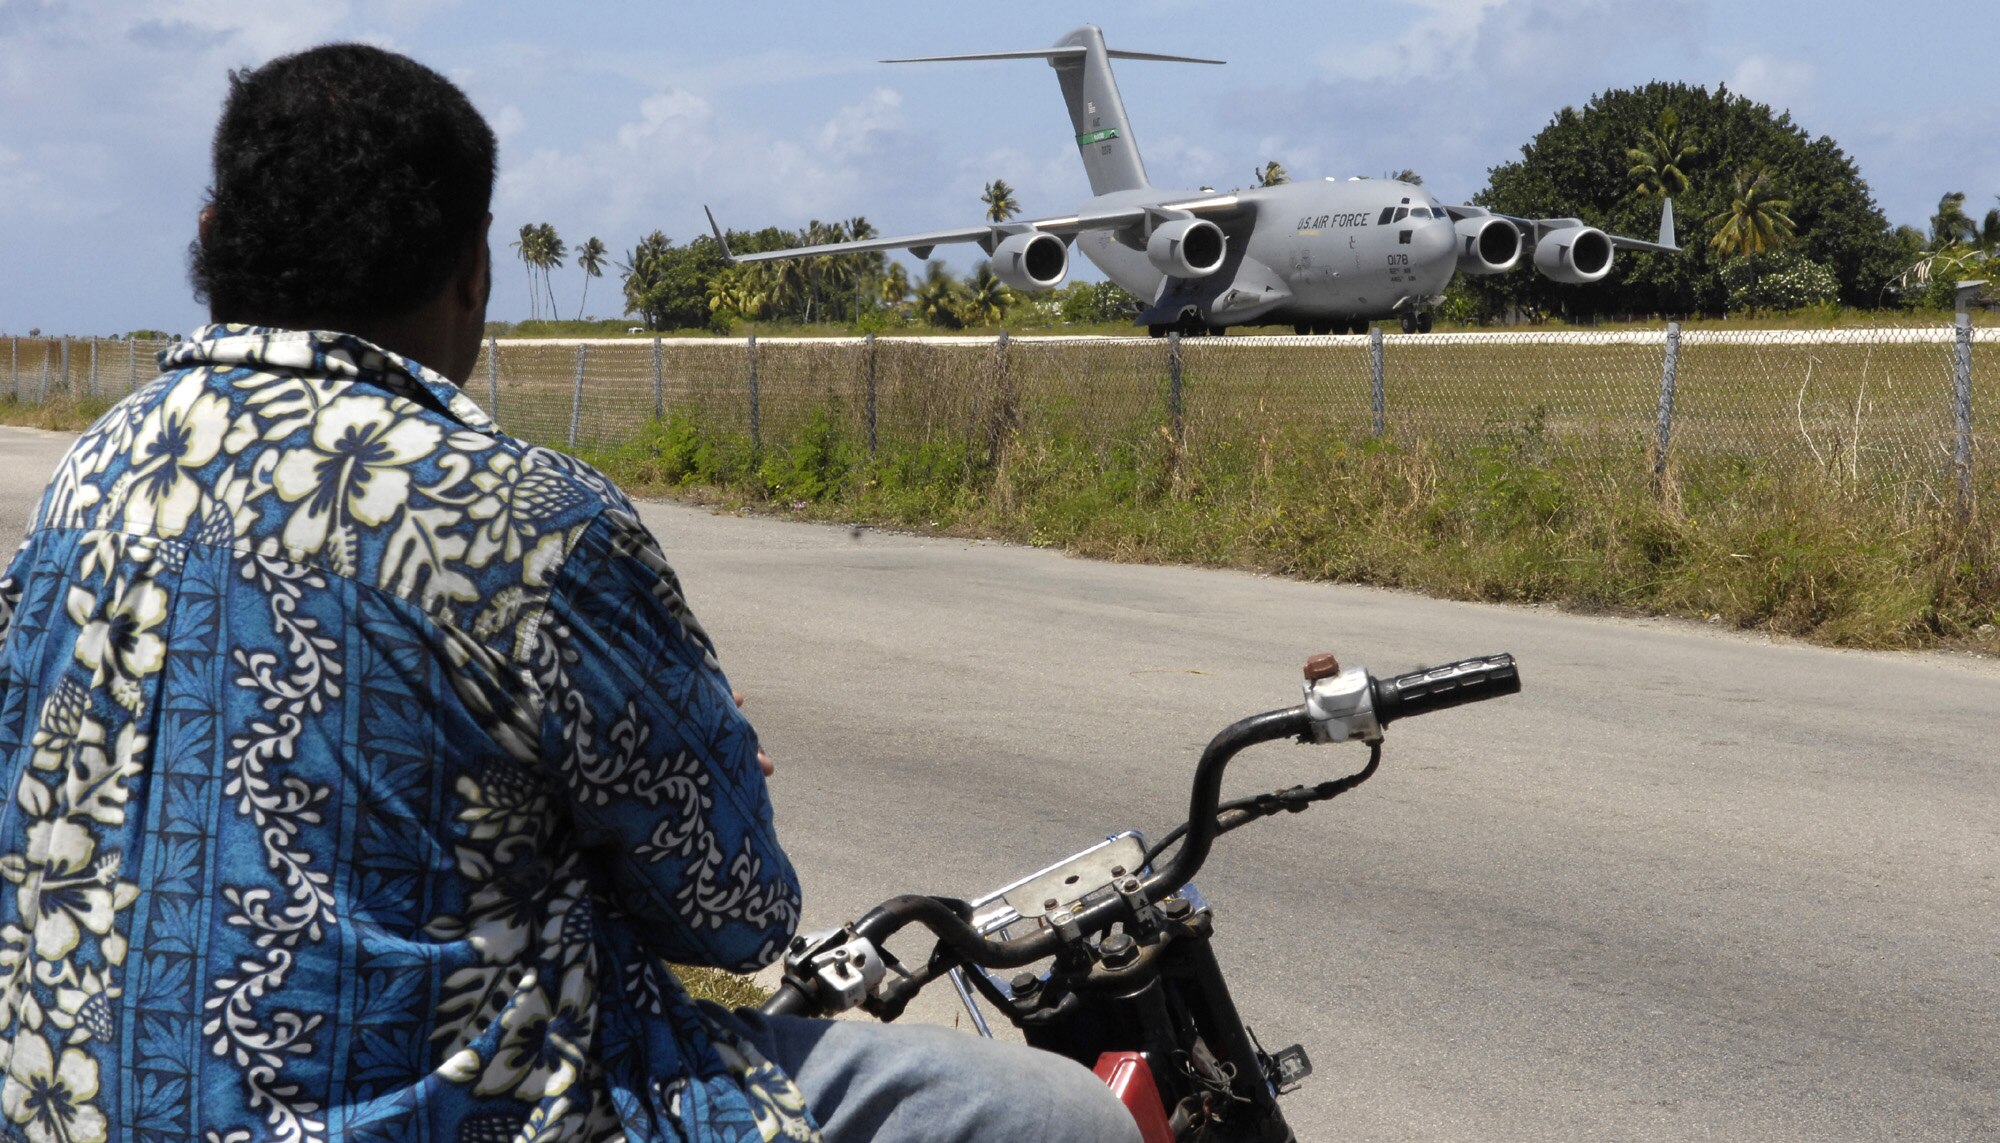 REPUBLIC OF NAURU – A local man watches a C-17 Globemaster III from McChord Air Force Base, Wash. land here July 27. The aircraft, piloted by a crew from the 728th Airlift Squadron, picked up a 12-person U.S. Pacific Command team deployed to provide training and assistance to the island's physicians and caregivers. This was the first time a substantial U.S. military presence has been in Nauru since World War II. The island is surrounded by a thick reef, precluding ships from docking, and its airport has a relatively short runway. The C-17's unique ability to land on short runways made this mission possible. (U.S. Air Force photo/Tech. Sgt. Chris Vadnais)